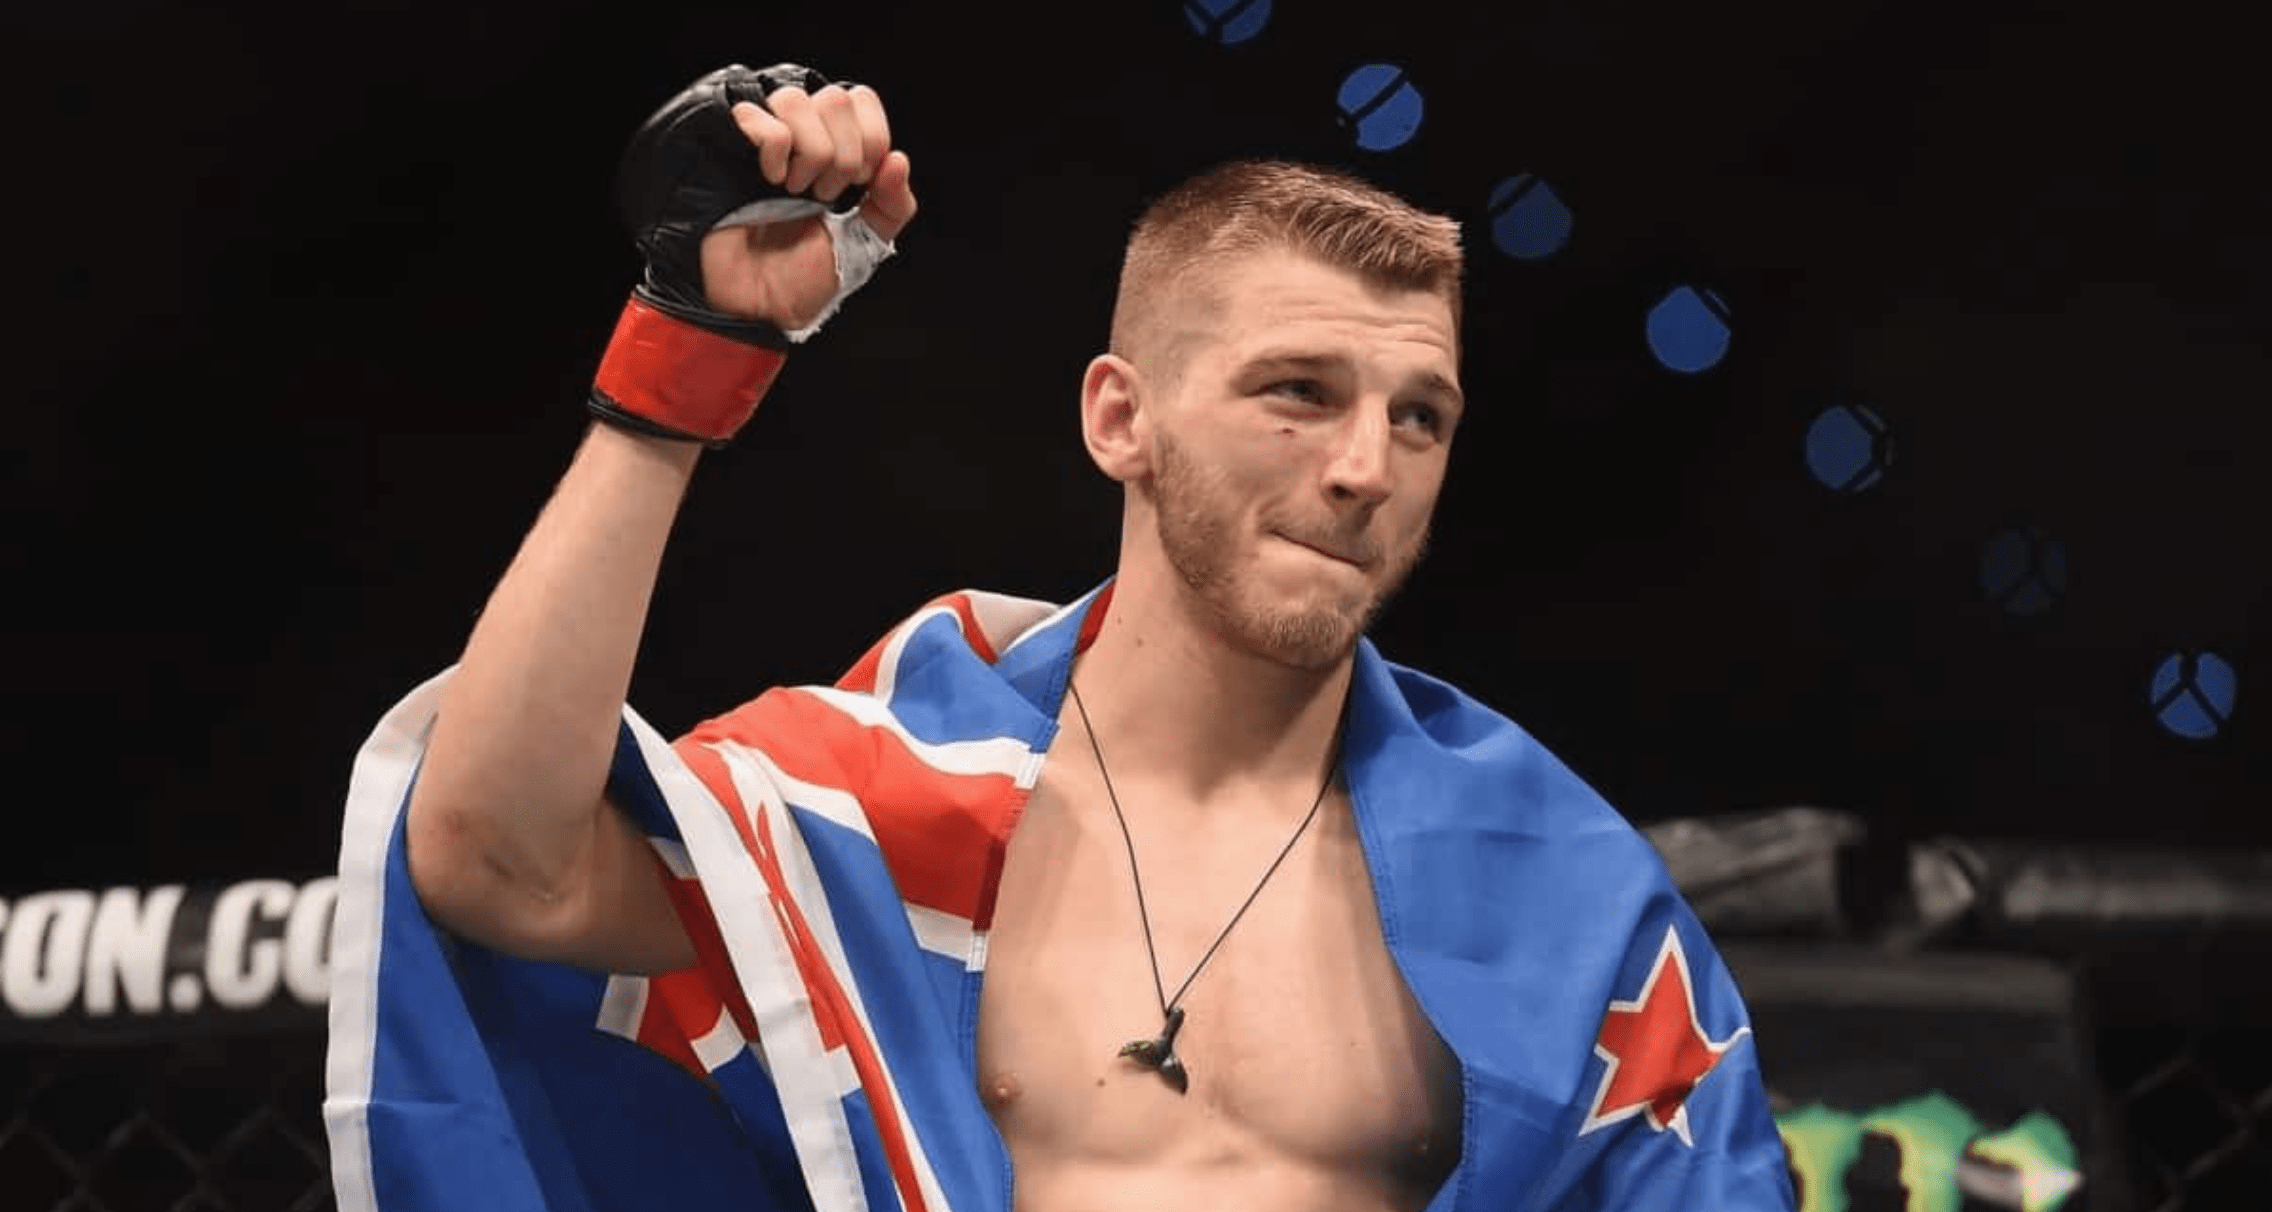 Hooker Reflects On Poirier Loss, Names Two Men He Wants To Fight Next